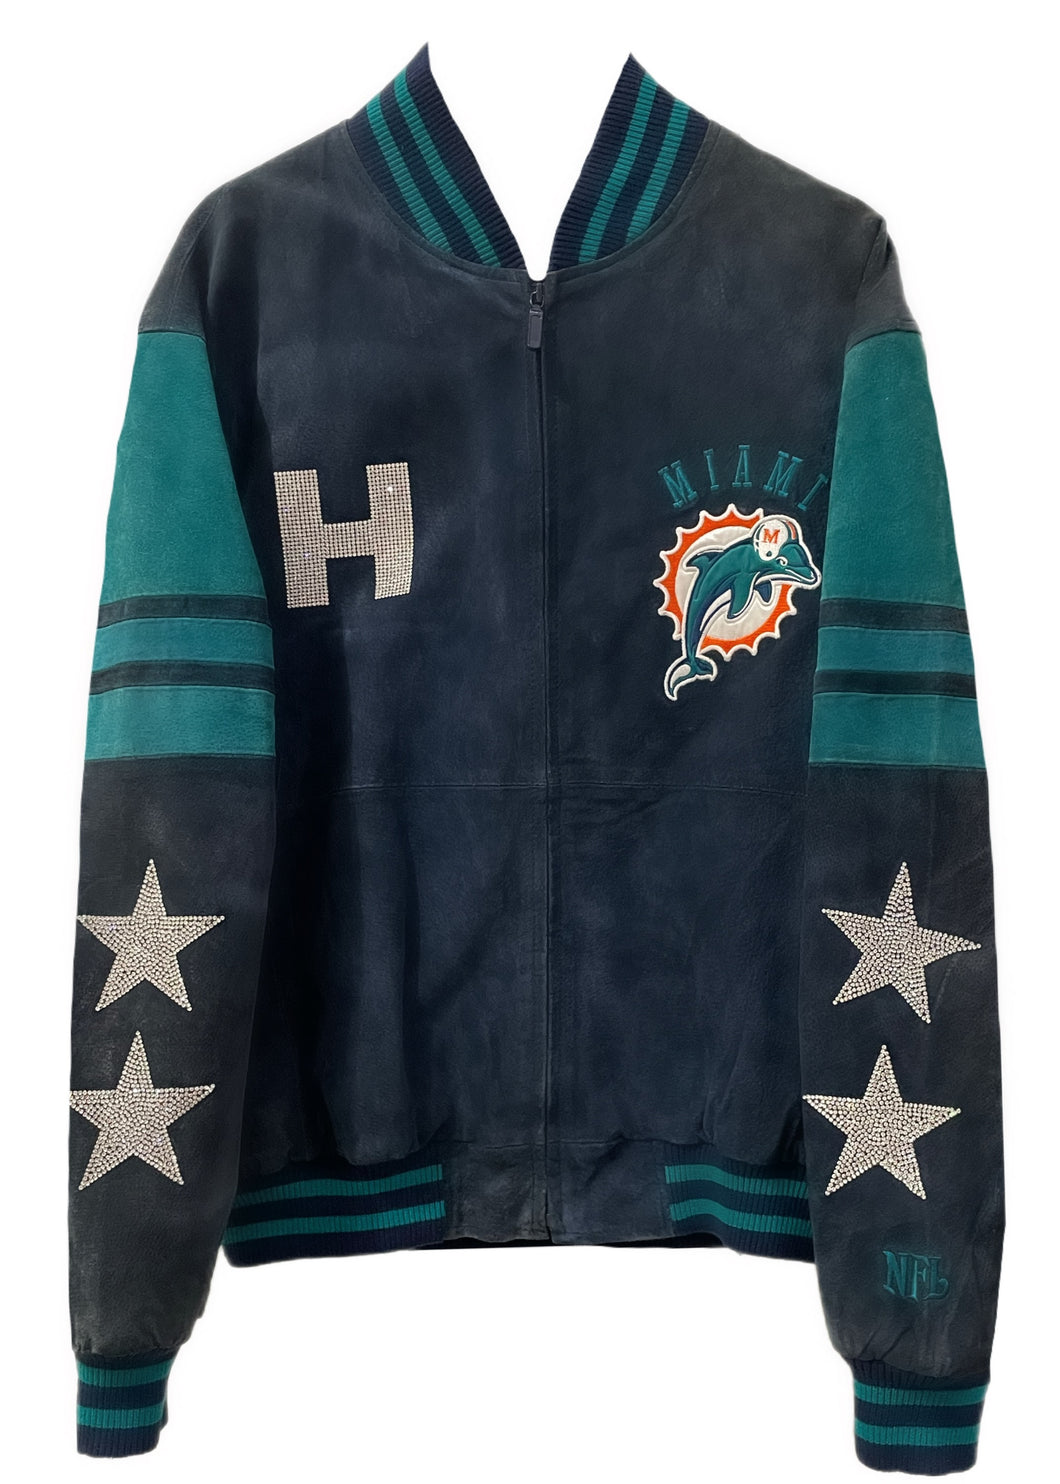 Miami Dolphins, NFL “Rare Find” One of a KIND Vintage Suede Jacket with Crystal Star Design, Custom Crystal Number & Initial